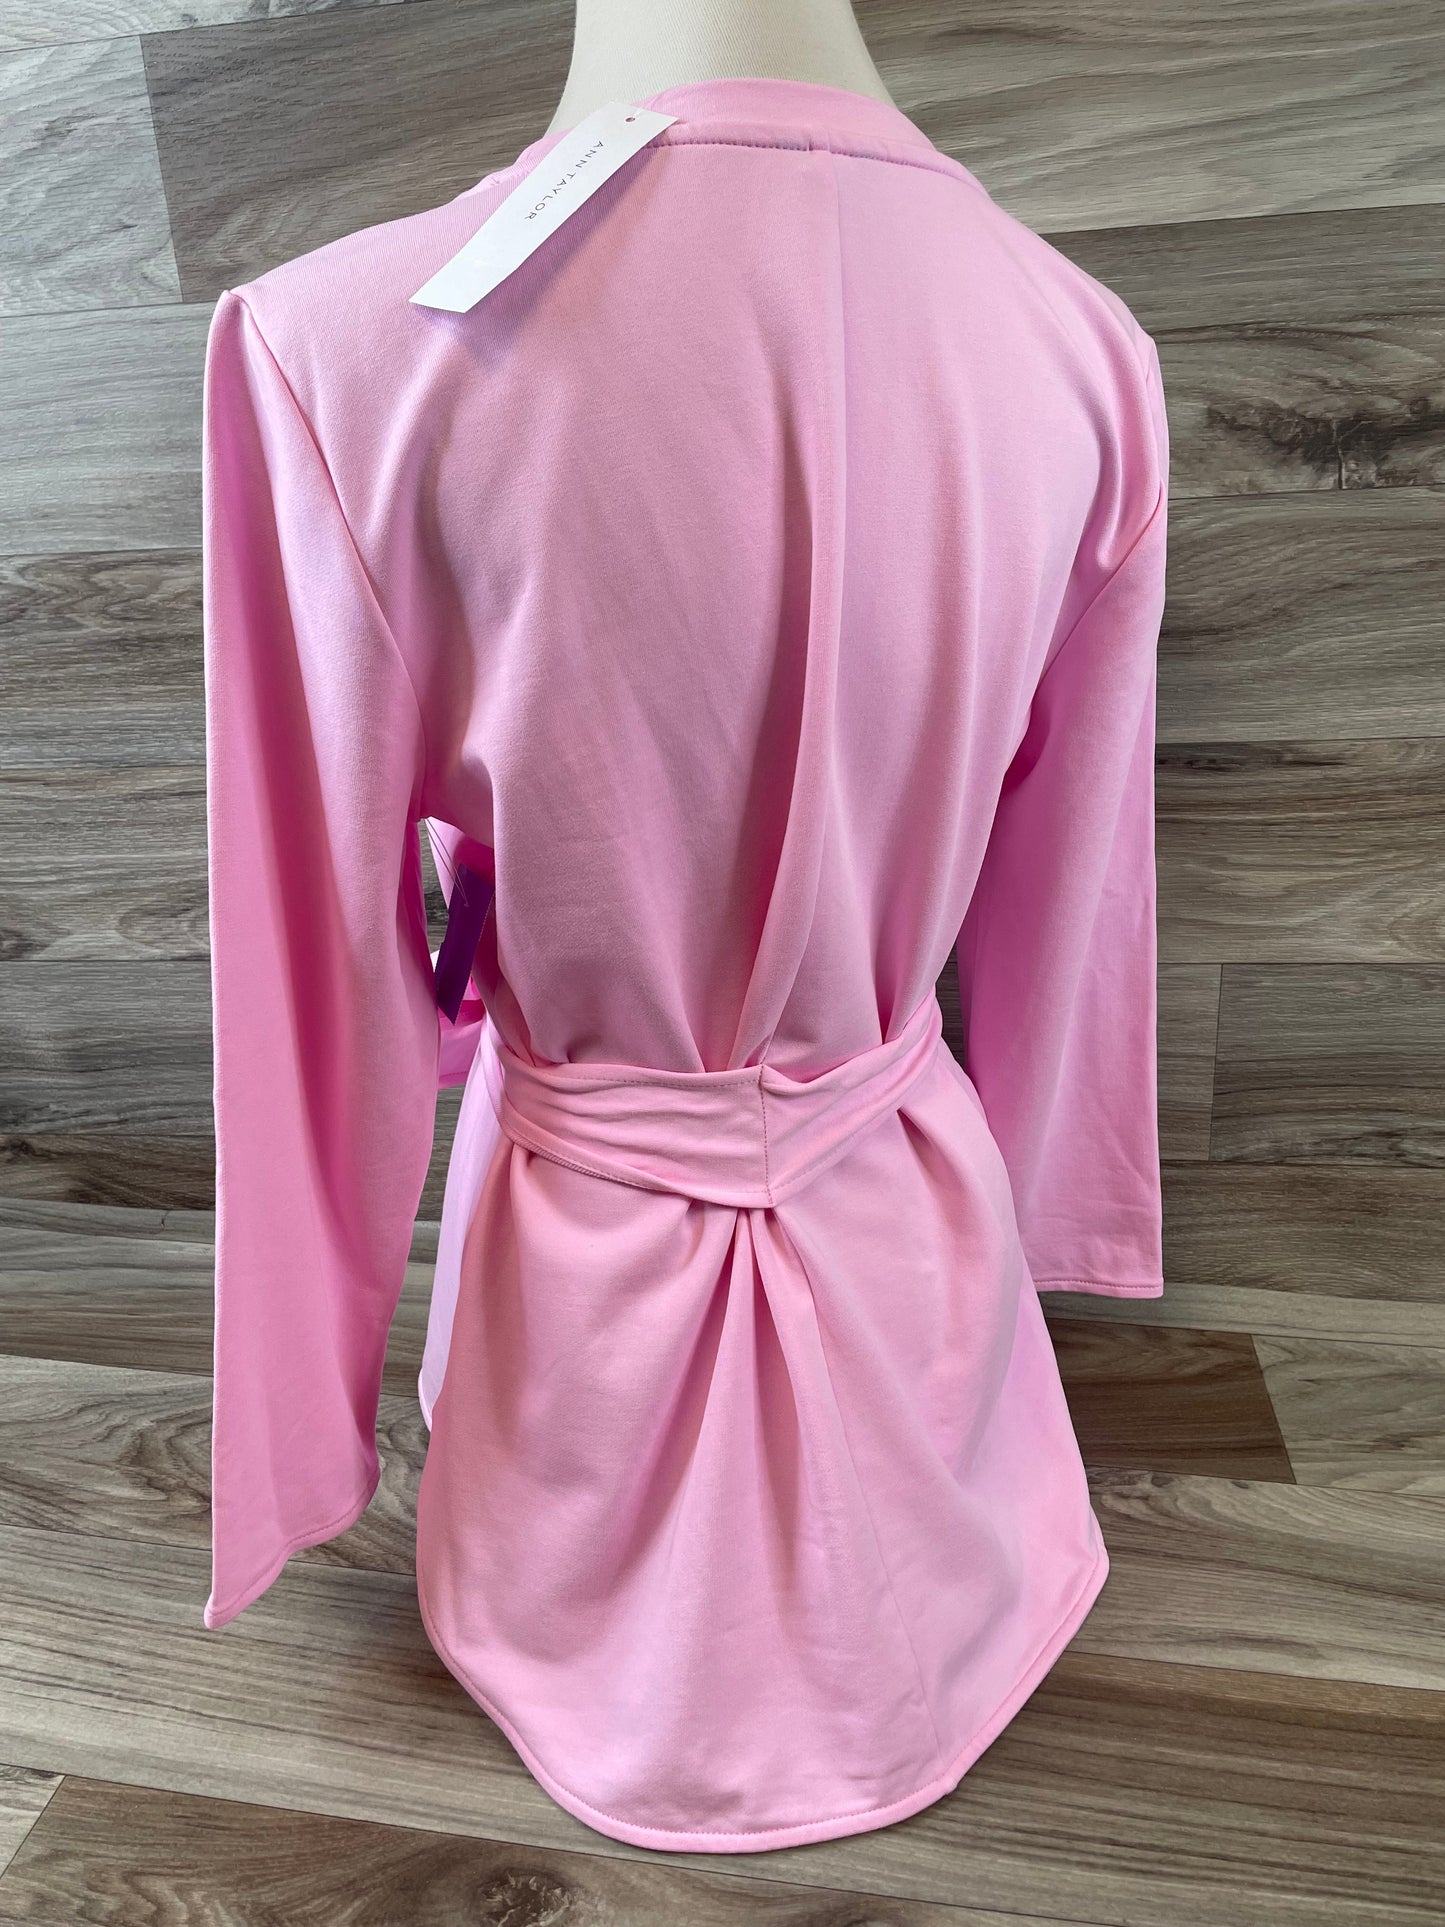 Pink Top 3/4 Sleeve Ann Taylor, Size M